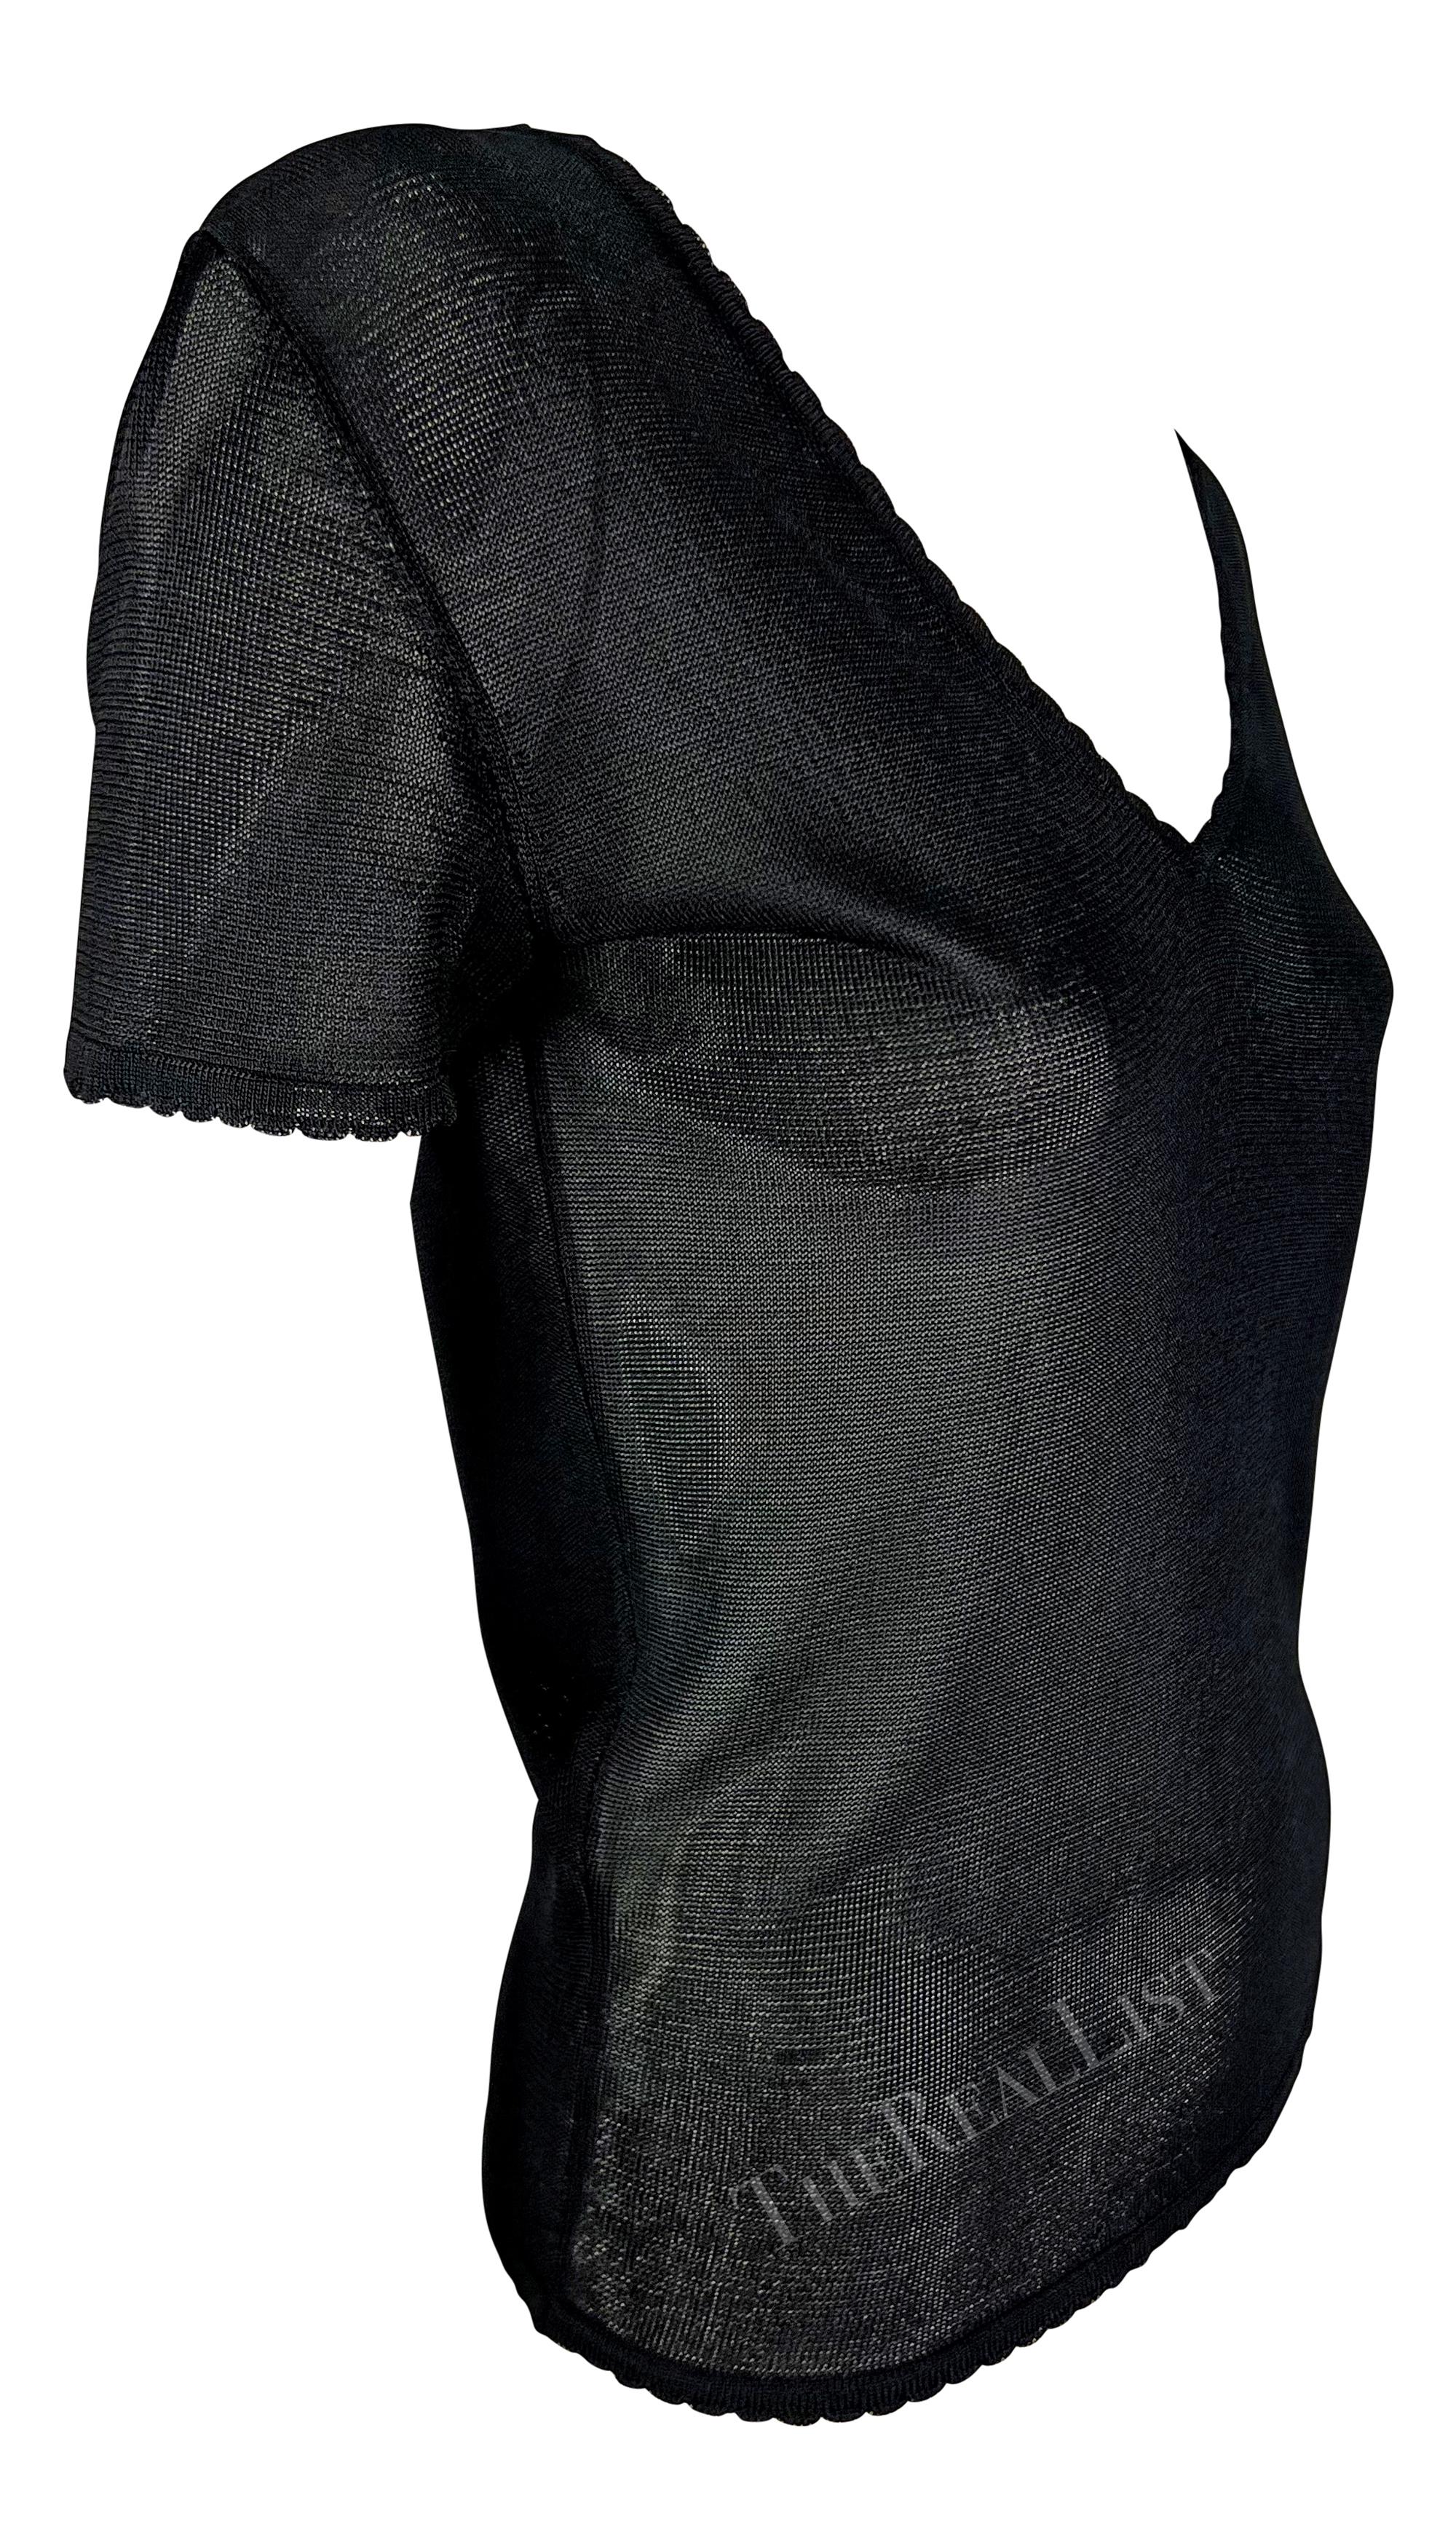 S/S 1997 Gianni Versace Scallop Knit Sheer Viscose V-Neck Black Sweater Top For Sale 3